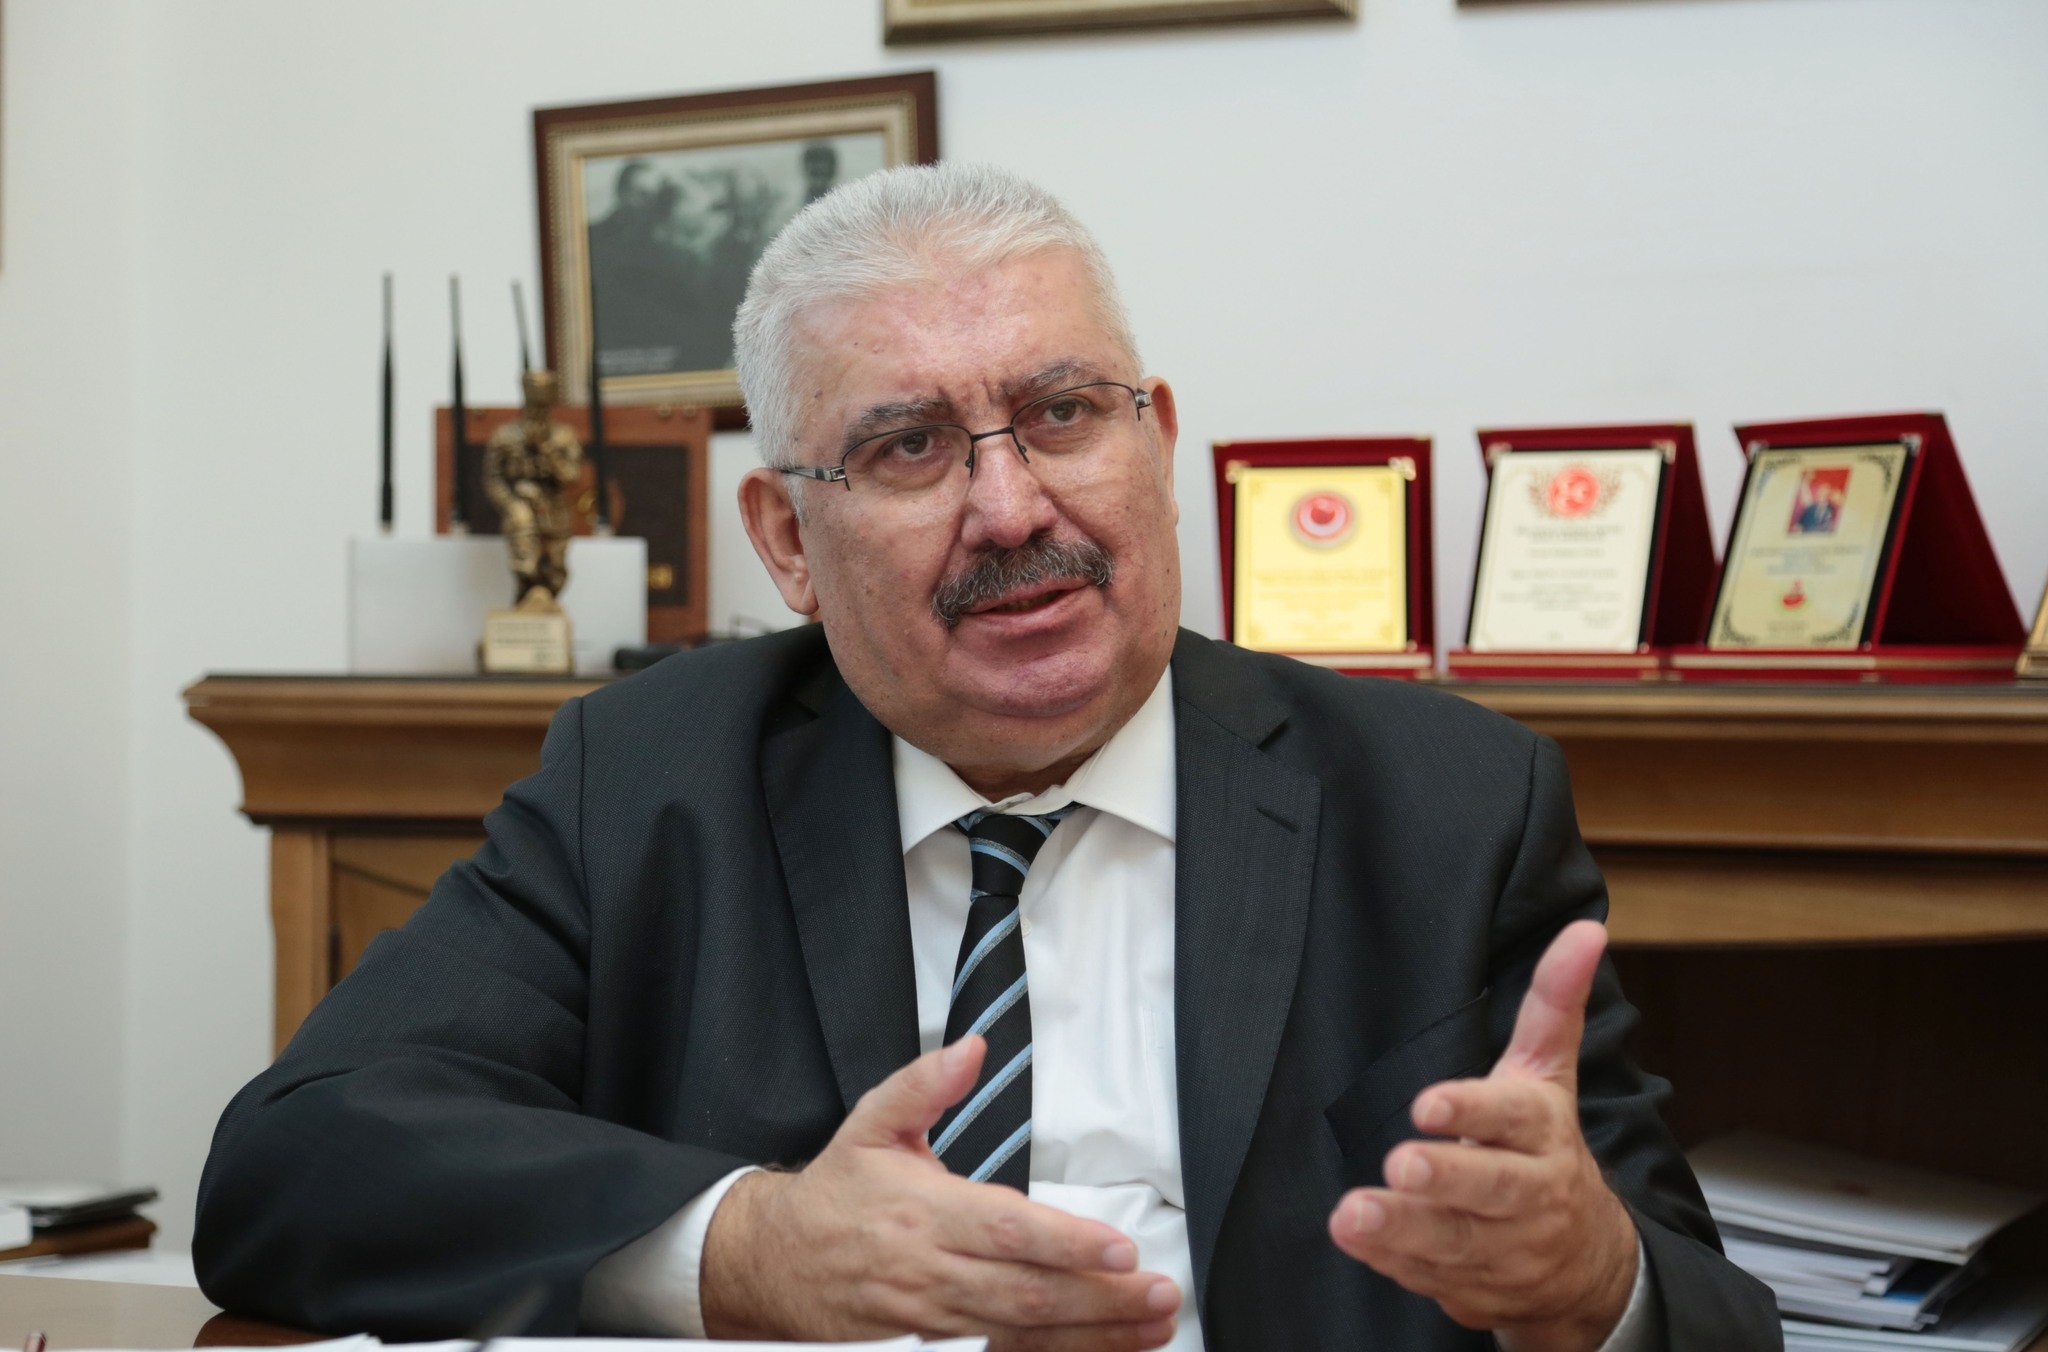 MHP Deputy Chair Semih Yalu00e7u0131n said the new presidential system should be embraced by the public as it is important for the nationu2019s stability and permanency.